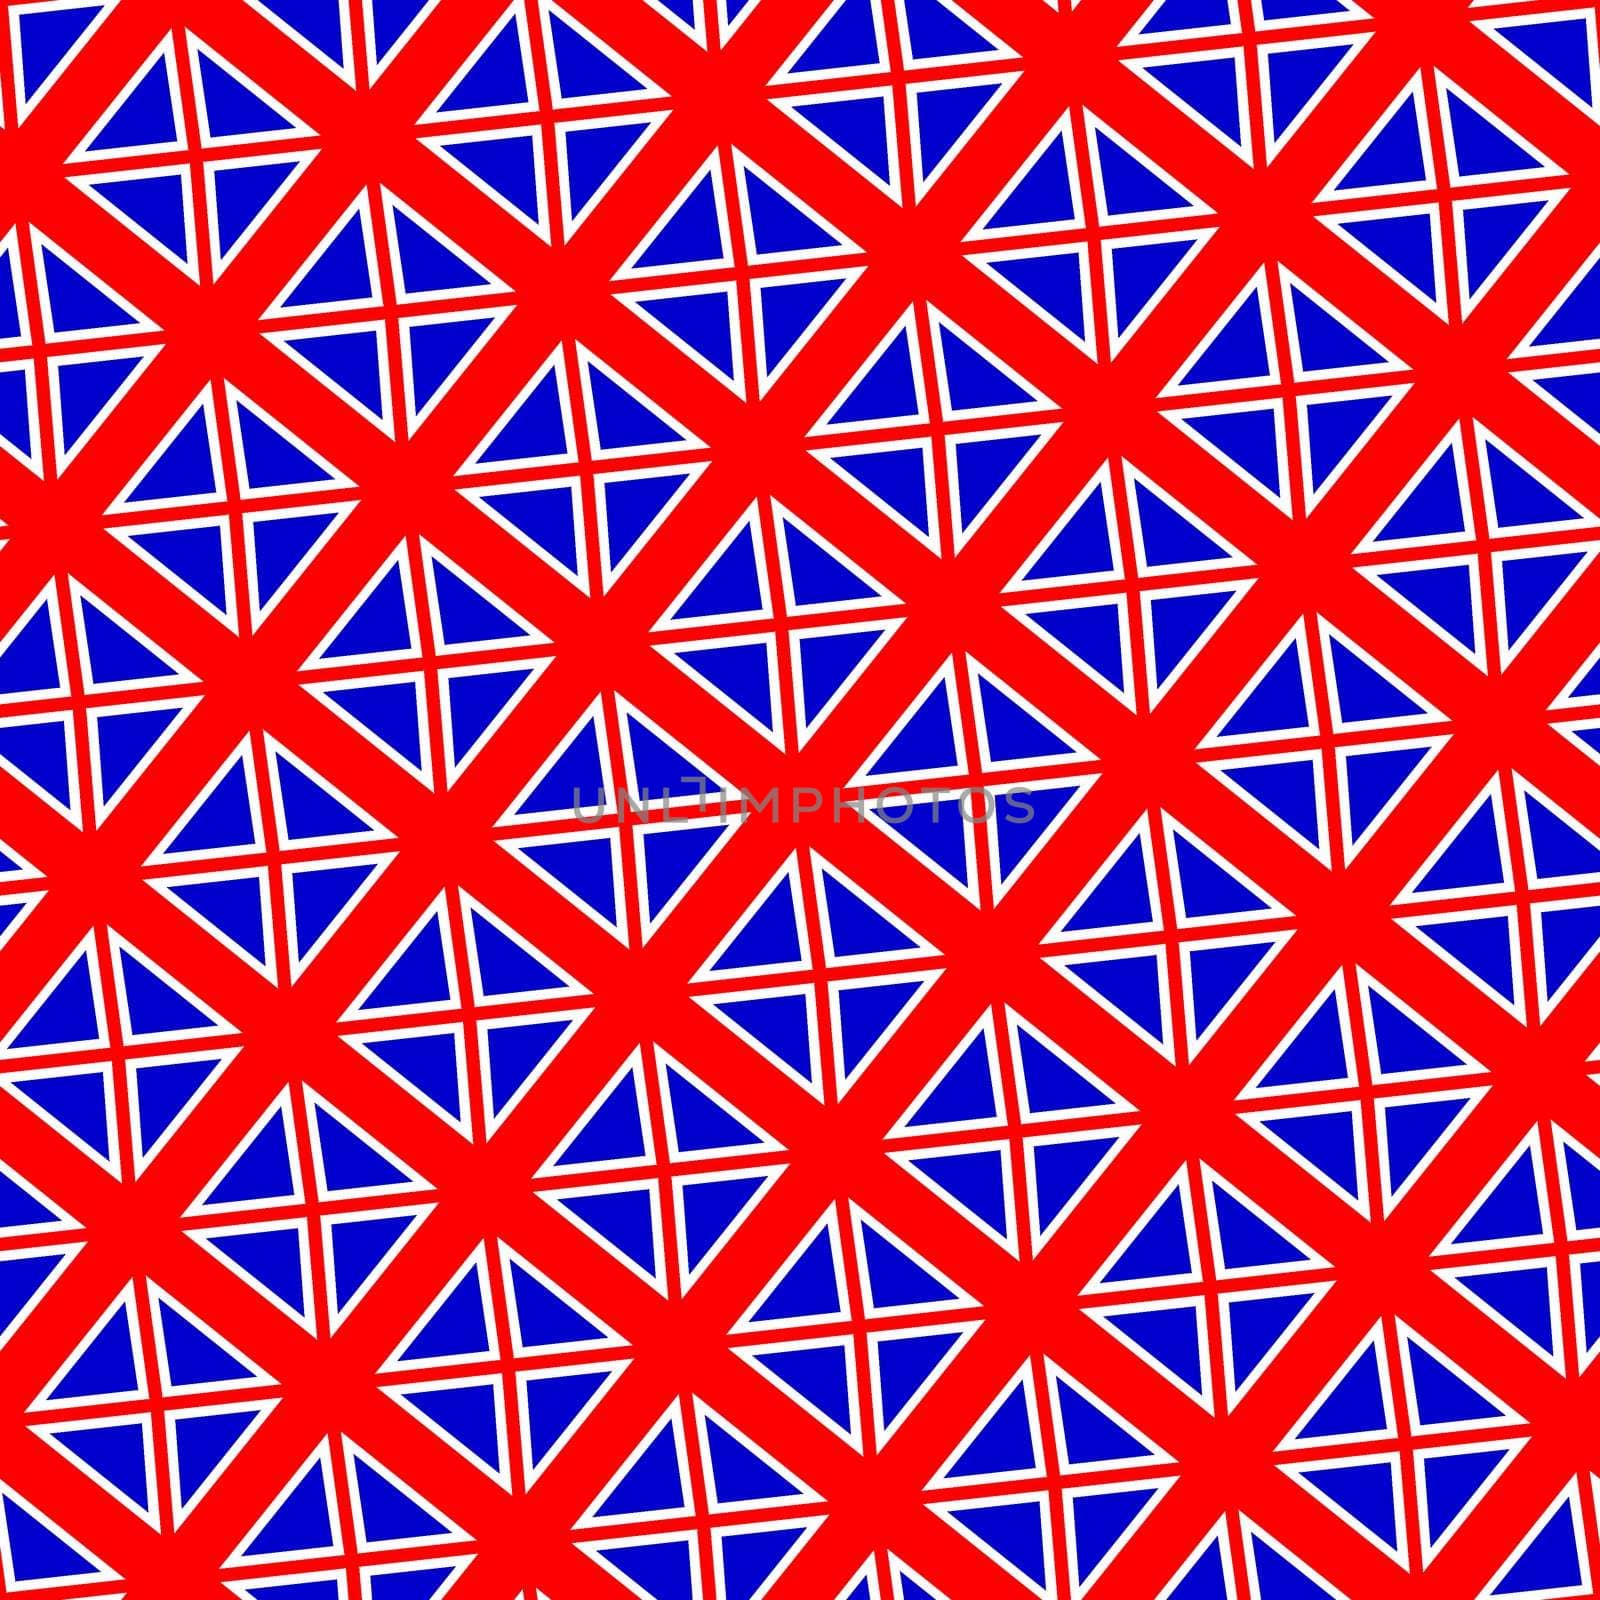 seamless texture of blue, red and white geometric shapes